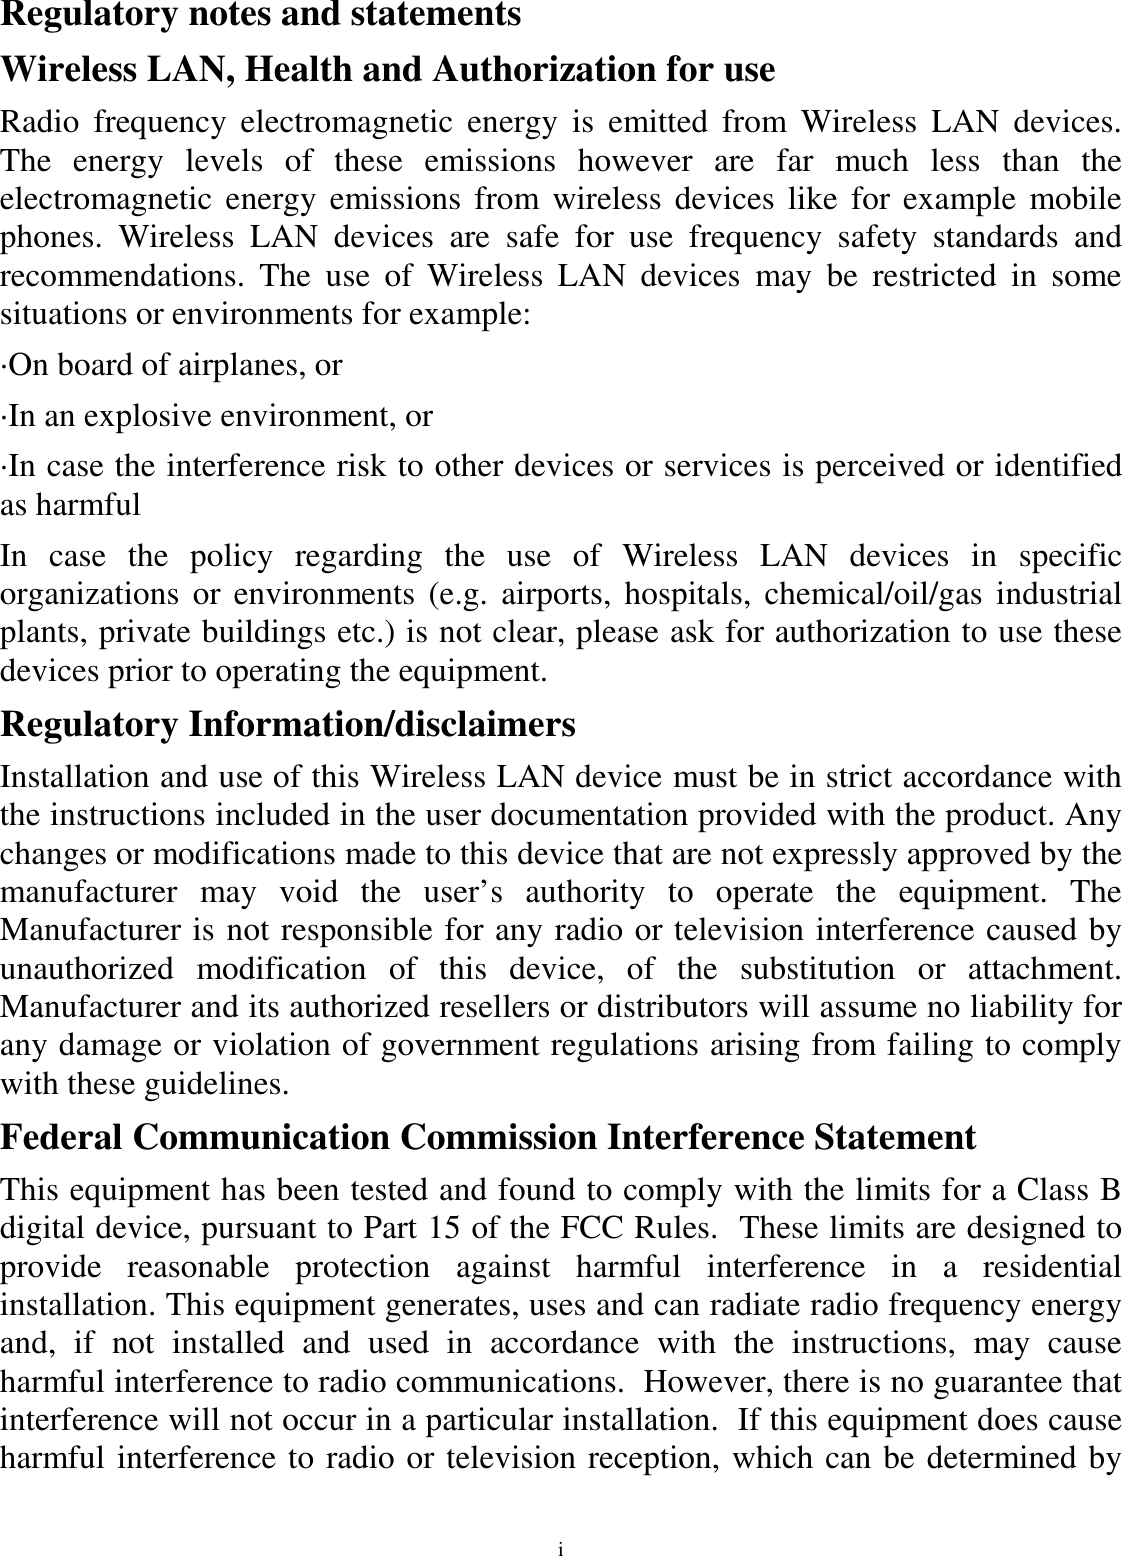 i Regulatory notes and statements Wireless LAN, Health and Authorization for use Radio  frequency  electromagnetic  energy  is  emitted  from  Wireless  LAN  devices. The  energy  levels  of  these  emissions  however  are  far  much  less  than  the electromagnetic  energy  emissions  from wireless devices like for example  mobile phones.  Wireless  LAN  devices  are  safe  for  use  frequency  safety  standards  and recommendations.  The  use  of  Wireless  LAN  devices  may  be  restricted  in  some situations or environments for example: ·On board of airplanes, or ·In an explosive environment, or ·In case the interference risk to other devices or services is perceived or identified as harmful In  case  the  policy  regarding  the  use  of  Wireless  LAN  devices  in  specific organizations  or environments  (e.g.  airports,  hospitals, chemical/oil/gas  industrial plants, private buildings etc.) is not clear, please ask for authorization to use these devices prior to operating the equipment. Regulatory Information/disclaimers Installation and use of this Wireless LAN device must be in strict accordance with the instructions included in the user documentation provided with the product. Any changes or modifications made to this device that are not expressly approved by the manufacturer  may  void  the  user’s  authority  to  operate  the  equipment.  The Manufacturer is not responsible for any radio or television interference caused by unauthorized  modification  of  this  device,  of  the  substitution  or  attachment. Manufacturer and its authorized resellers or distributors will assume no liability for any damage or violation of government regulations arising from failing to comply with these guidelines. Federal Communication Commission Interference Statement This equipment has been tested and found to comply with the limits for a Class B digital device, pursuant to Part 15 of the FCC Rules.  These limits are designed to provide  reasonable  protection  against  harmful  interference  in  a  residential installation. This equipment generates, uses and can radiate radio frequency energy and,  if  not  installed  and  used  in  accordance  with  the  instructions,  may  cause harmful interference to radio communications.  However, there is no guarantee that interference will not occur in a particular installation.  If this equipment does cause harmful interference to radio or television reception, which can be determined by 